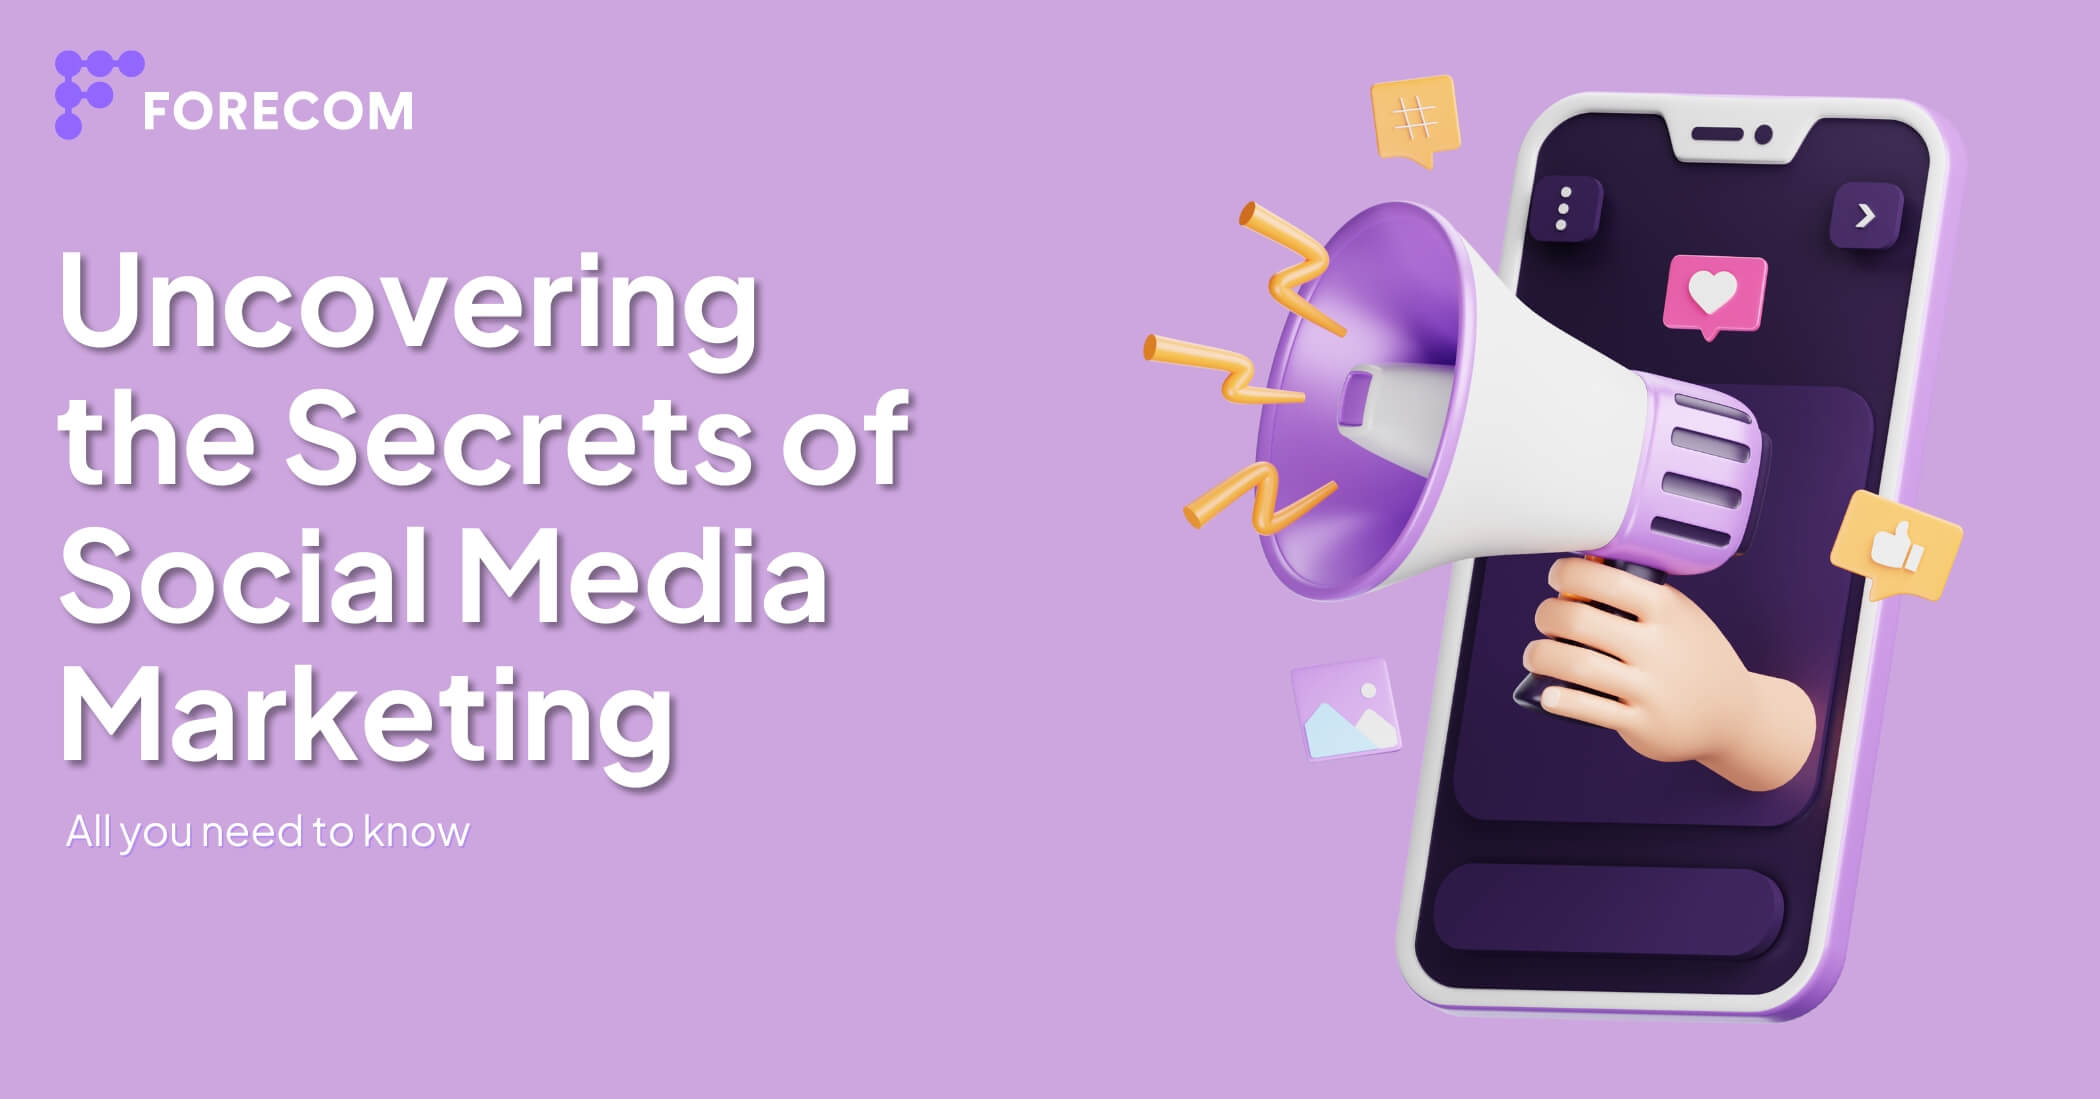 Uncovering the Secrets of Social Media Marketing